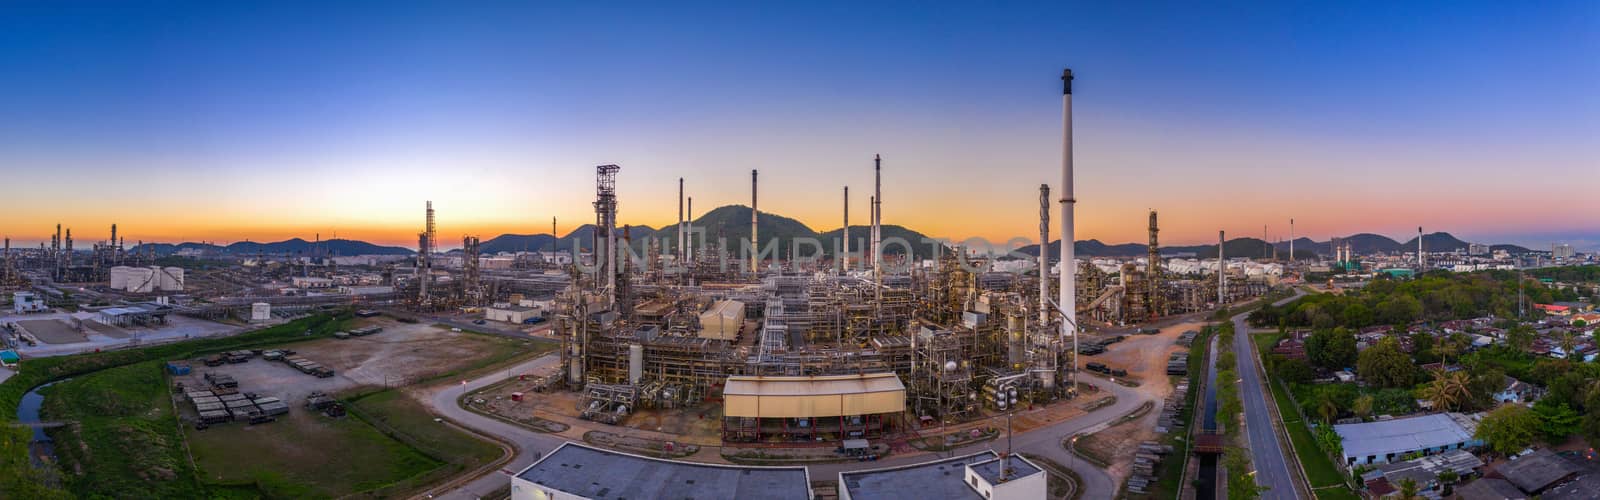 Aerial view of Oil refinery, Panorama of Oil Industry. by gutarphotoghaphy